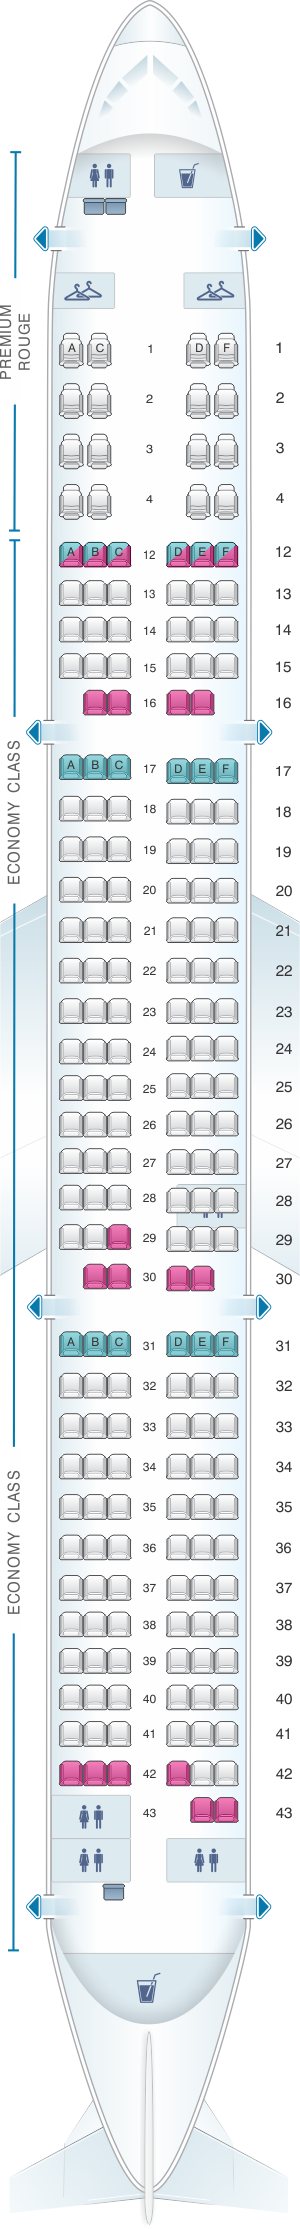 Air Canada 321 Seat Map Seat Map Air Canada Airbus A321 200 Rouge | SeatMaestro